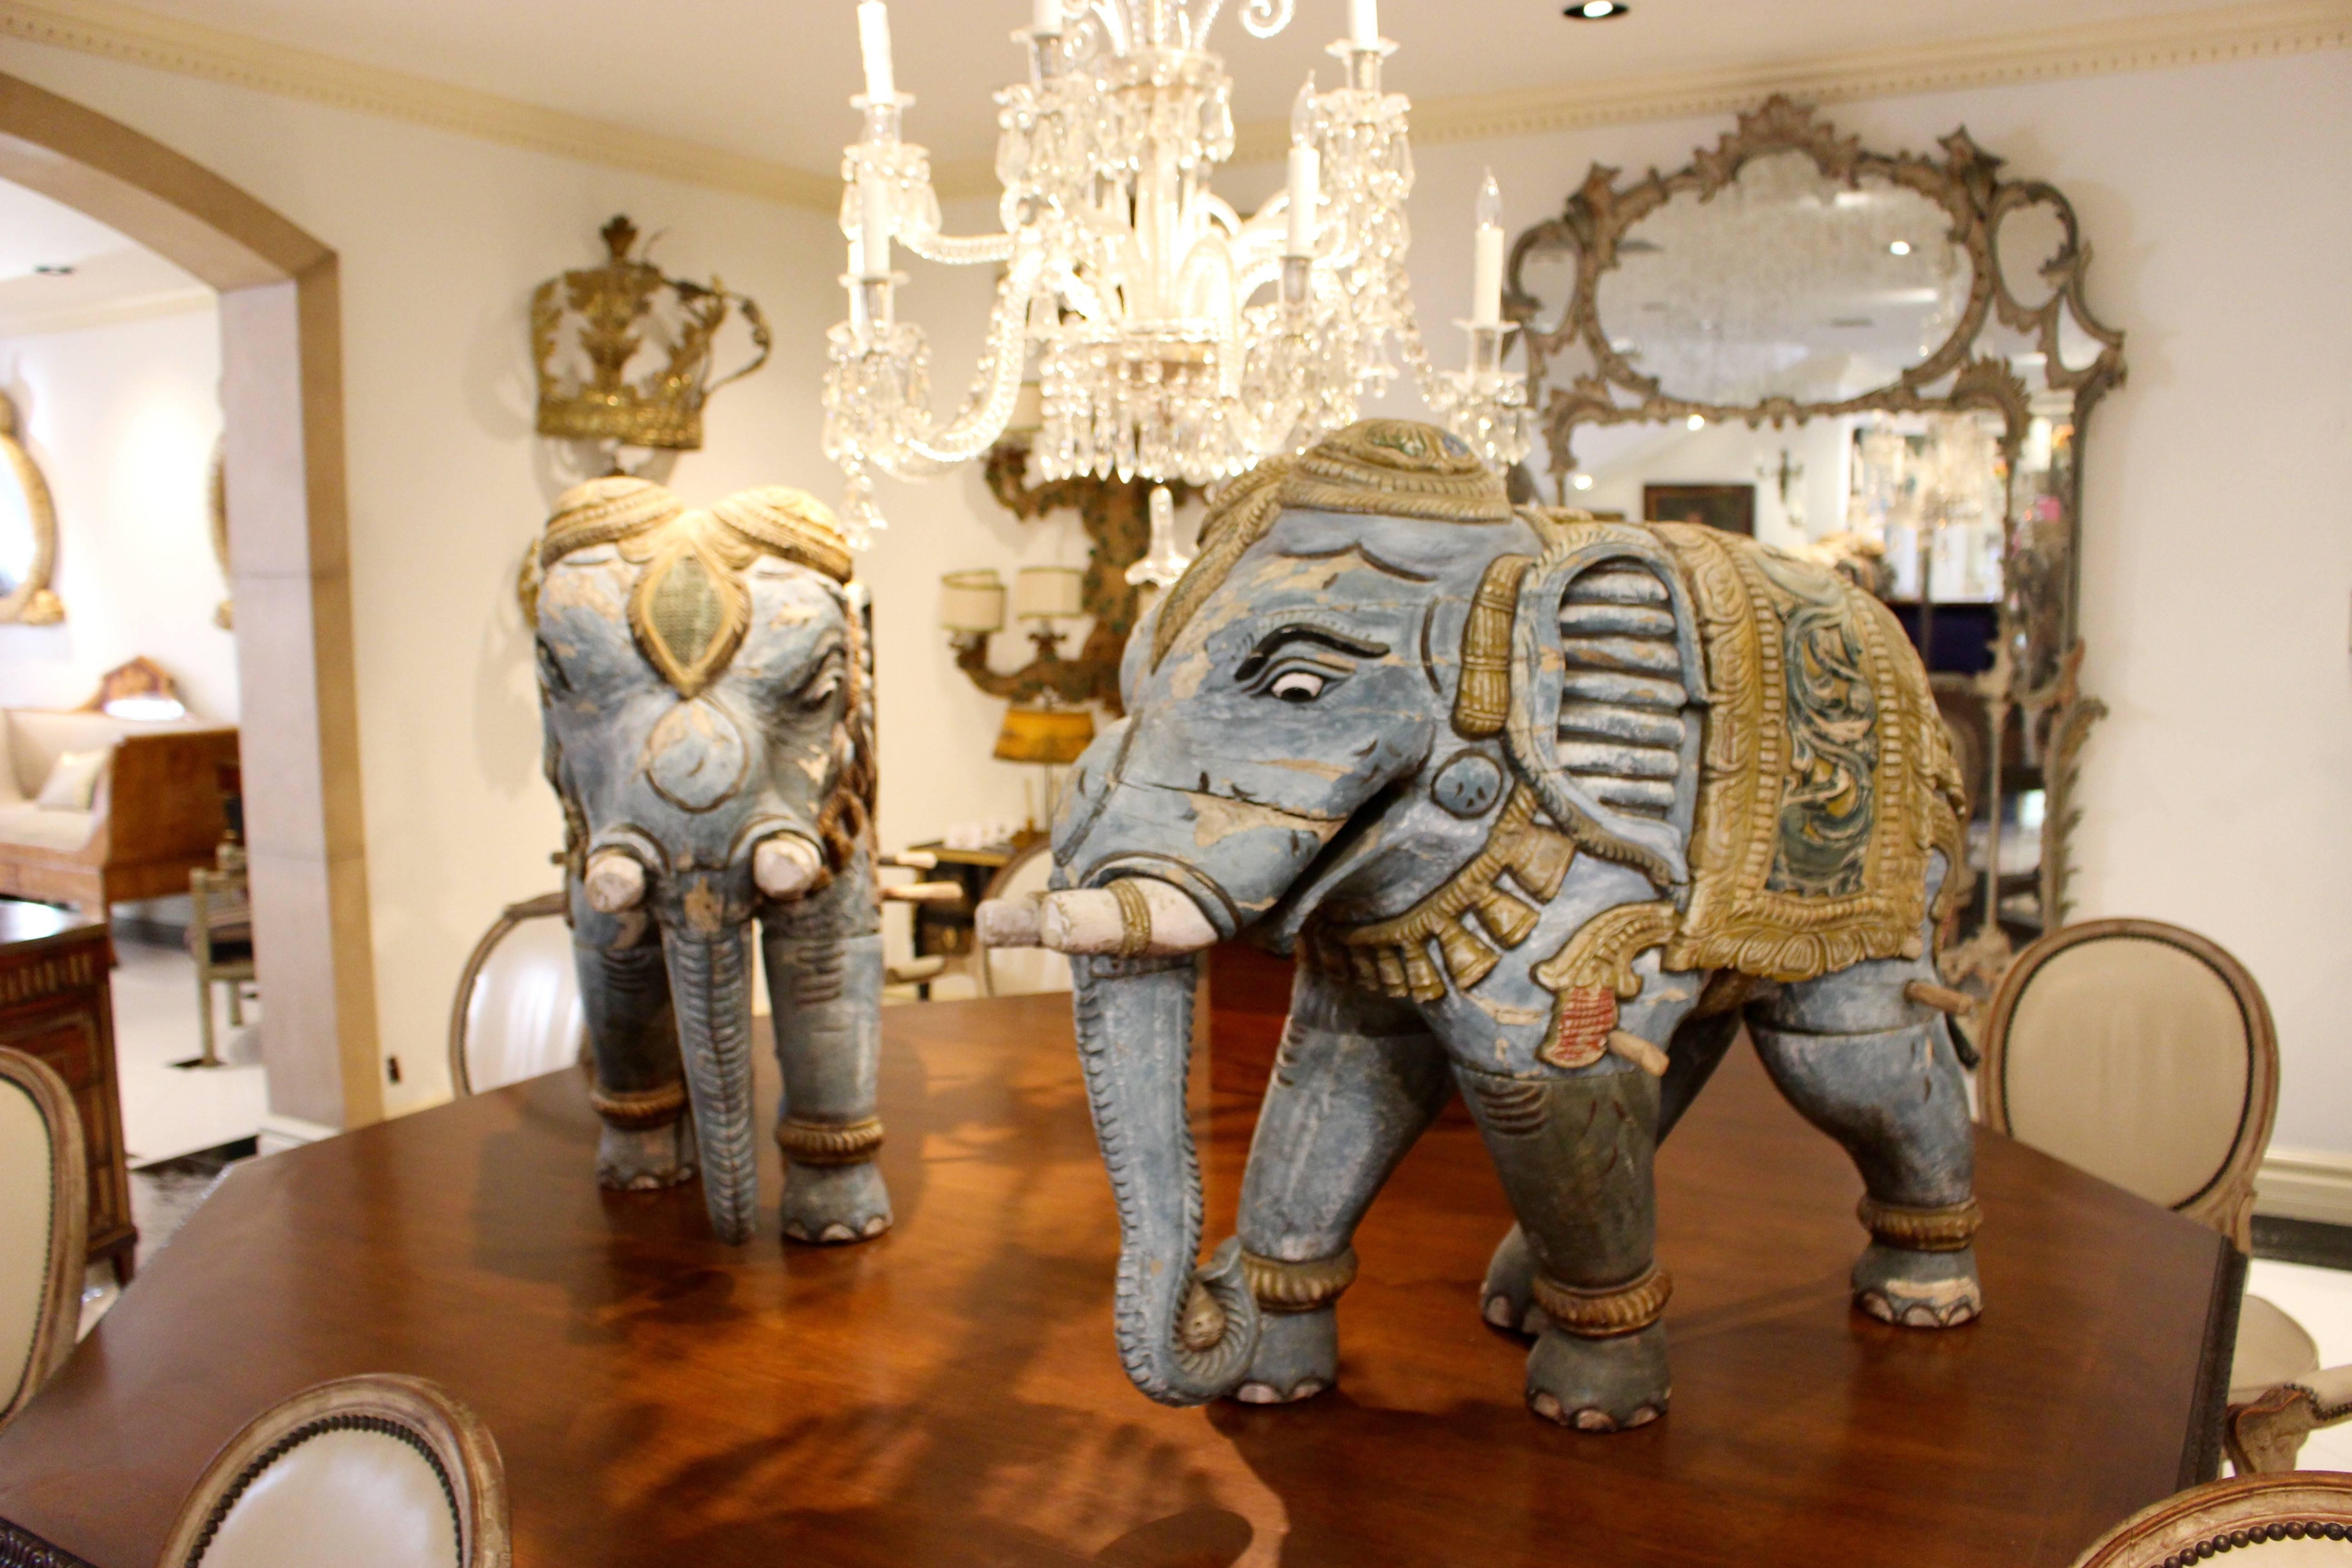 An exotic pair of striding wooden elephants sculptures carved and painted with exquisite detail. Wearing trinkets on the legs and tusks along with a large ceremonial necklace, each figure is caparisoned with an ornate yellow howdah blanket